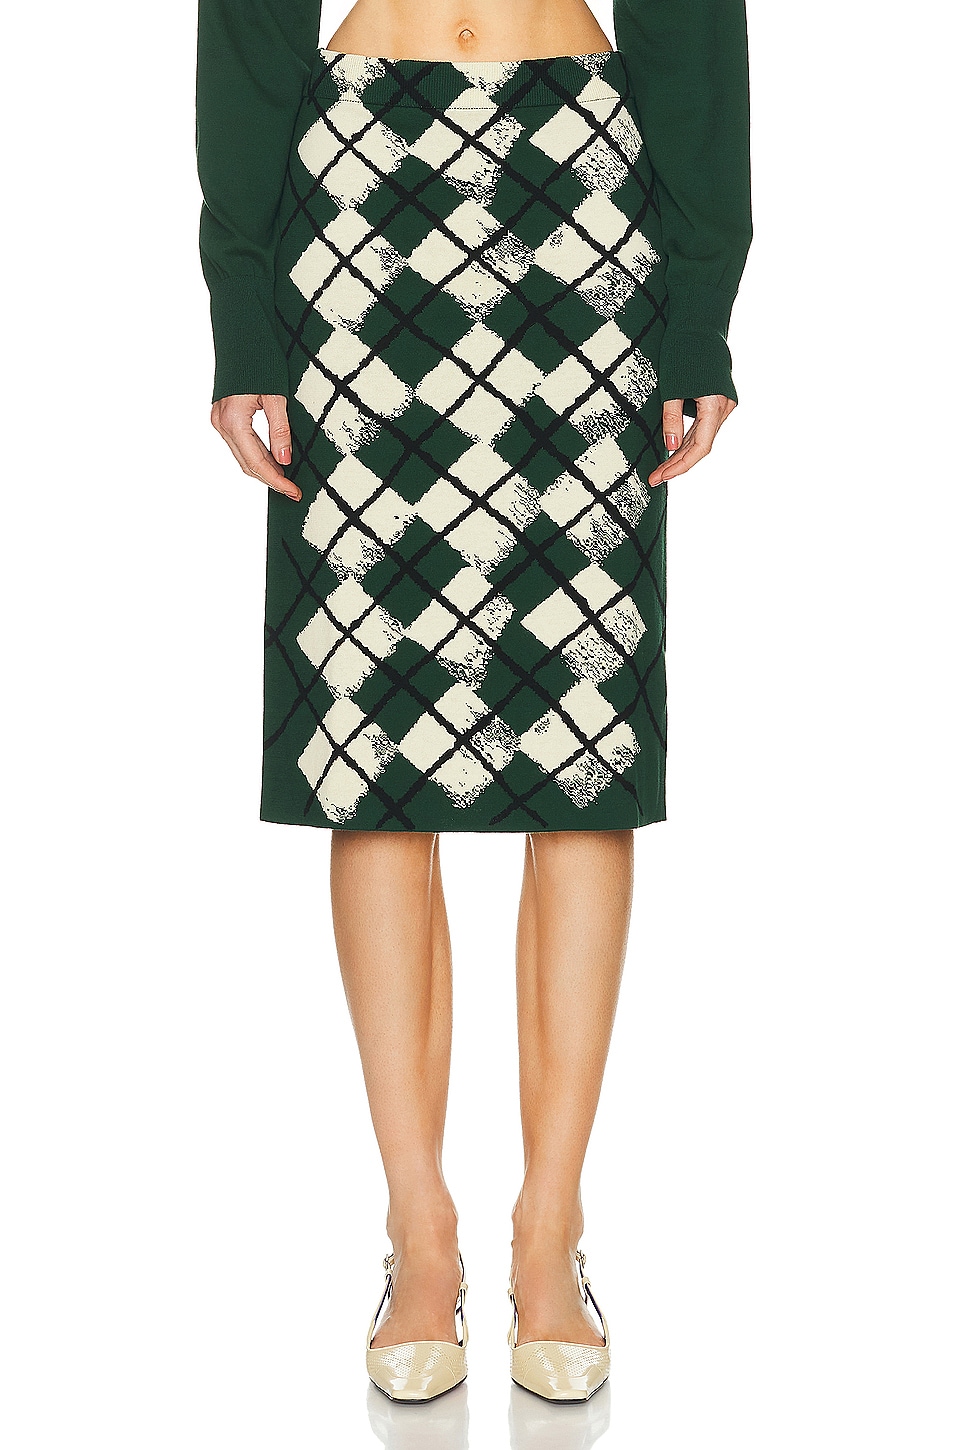 Image 1 of Burberry Midi Skirt in Ivy